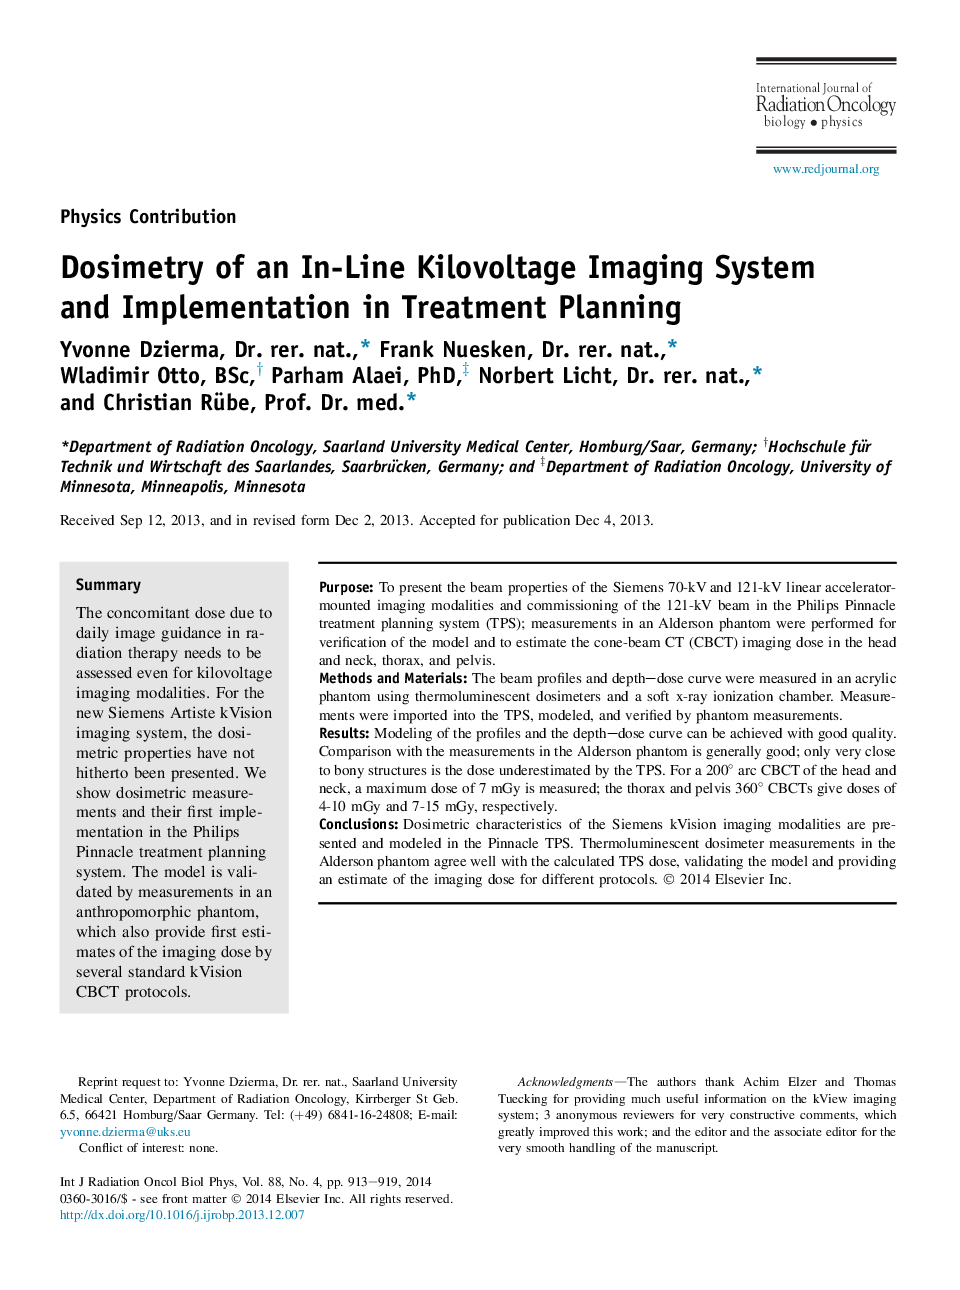 Dosimetry of an In-Line Kilovoltage Imaging System and Implementation in Treatment Planning